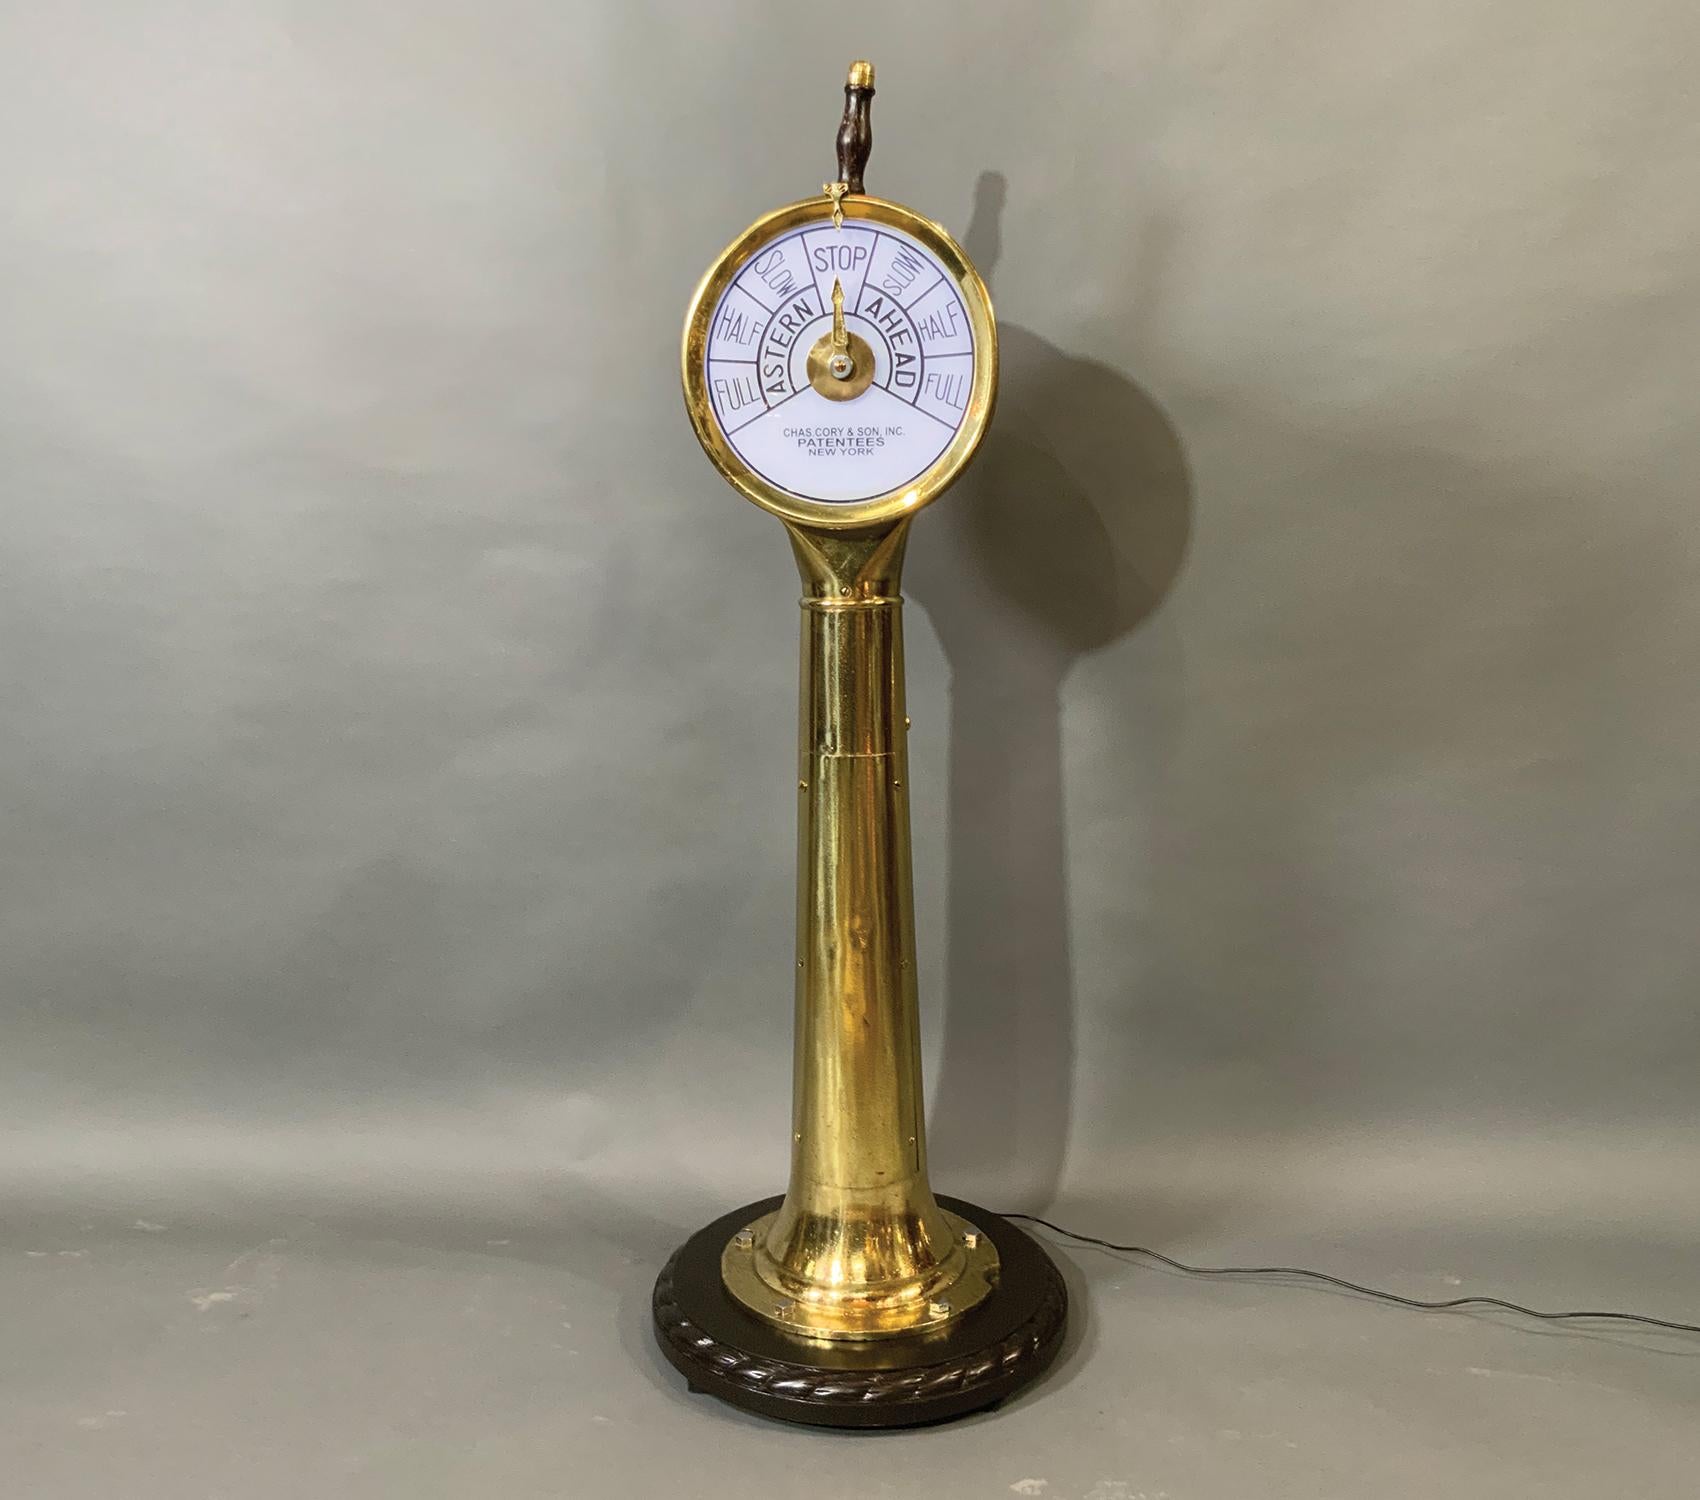 Solid brass ships engine order telegraph. This style has often used on yachts and tugboats. Showing astern and ahead commands showing slow, half and full. Varnished wood handle with brass cap. Mounted to a wood base. Note piece missing from bottom